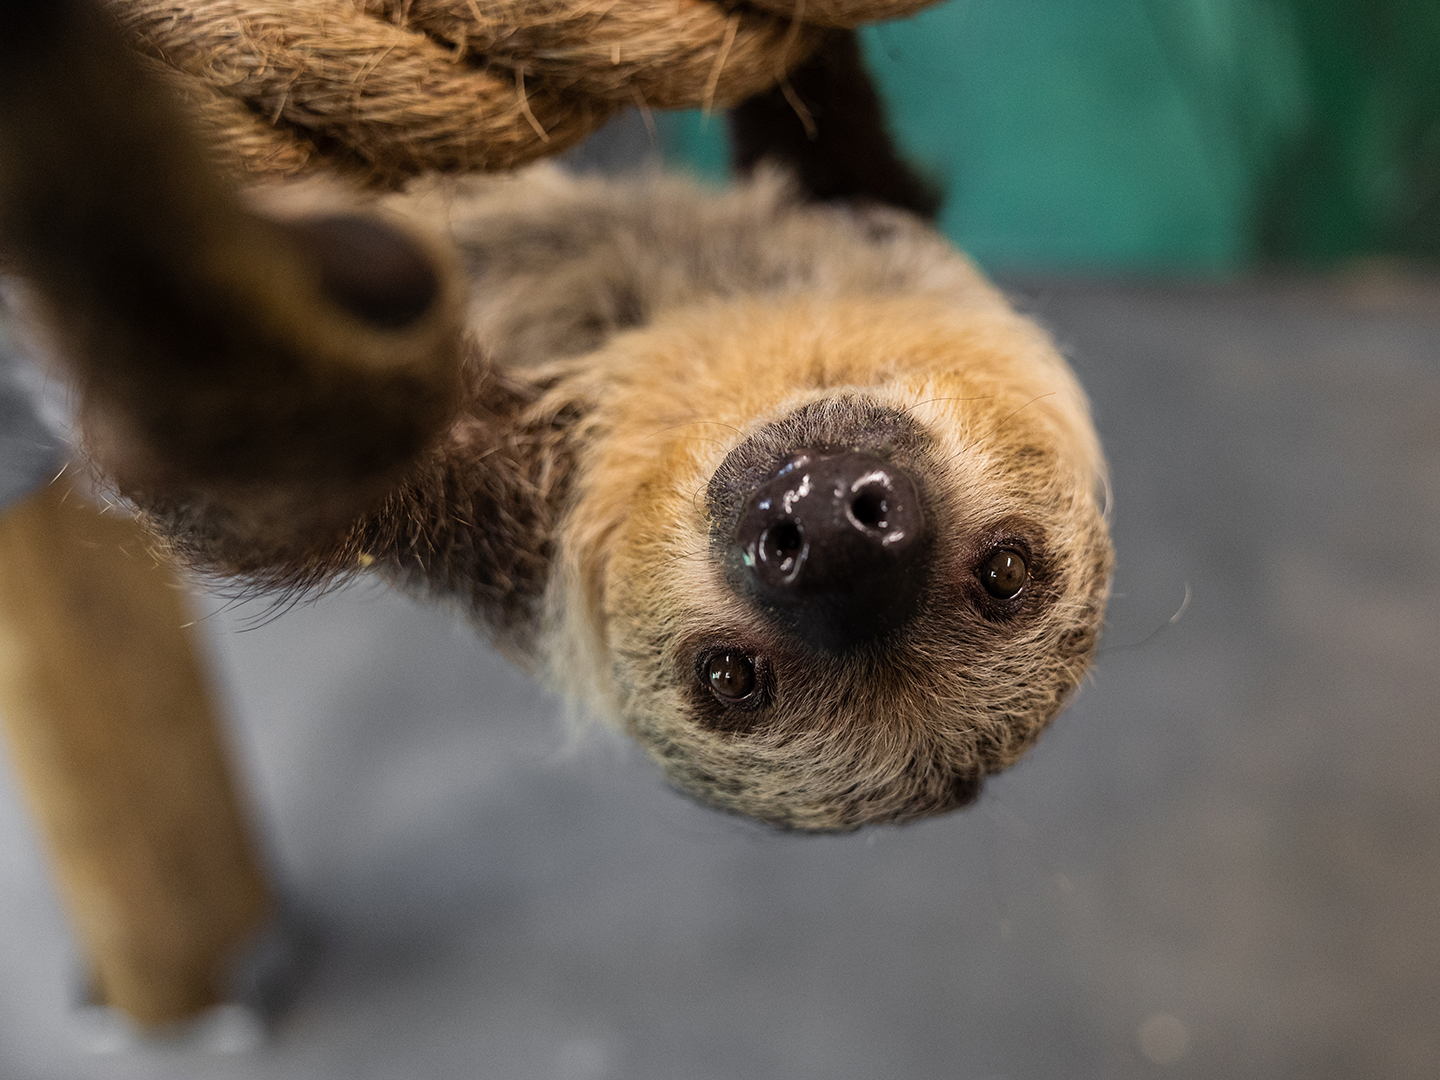 A sloth hanging upside down